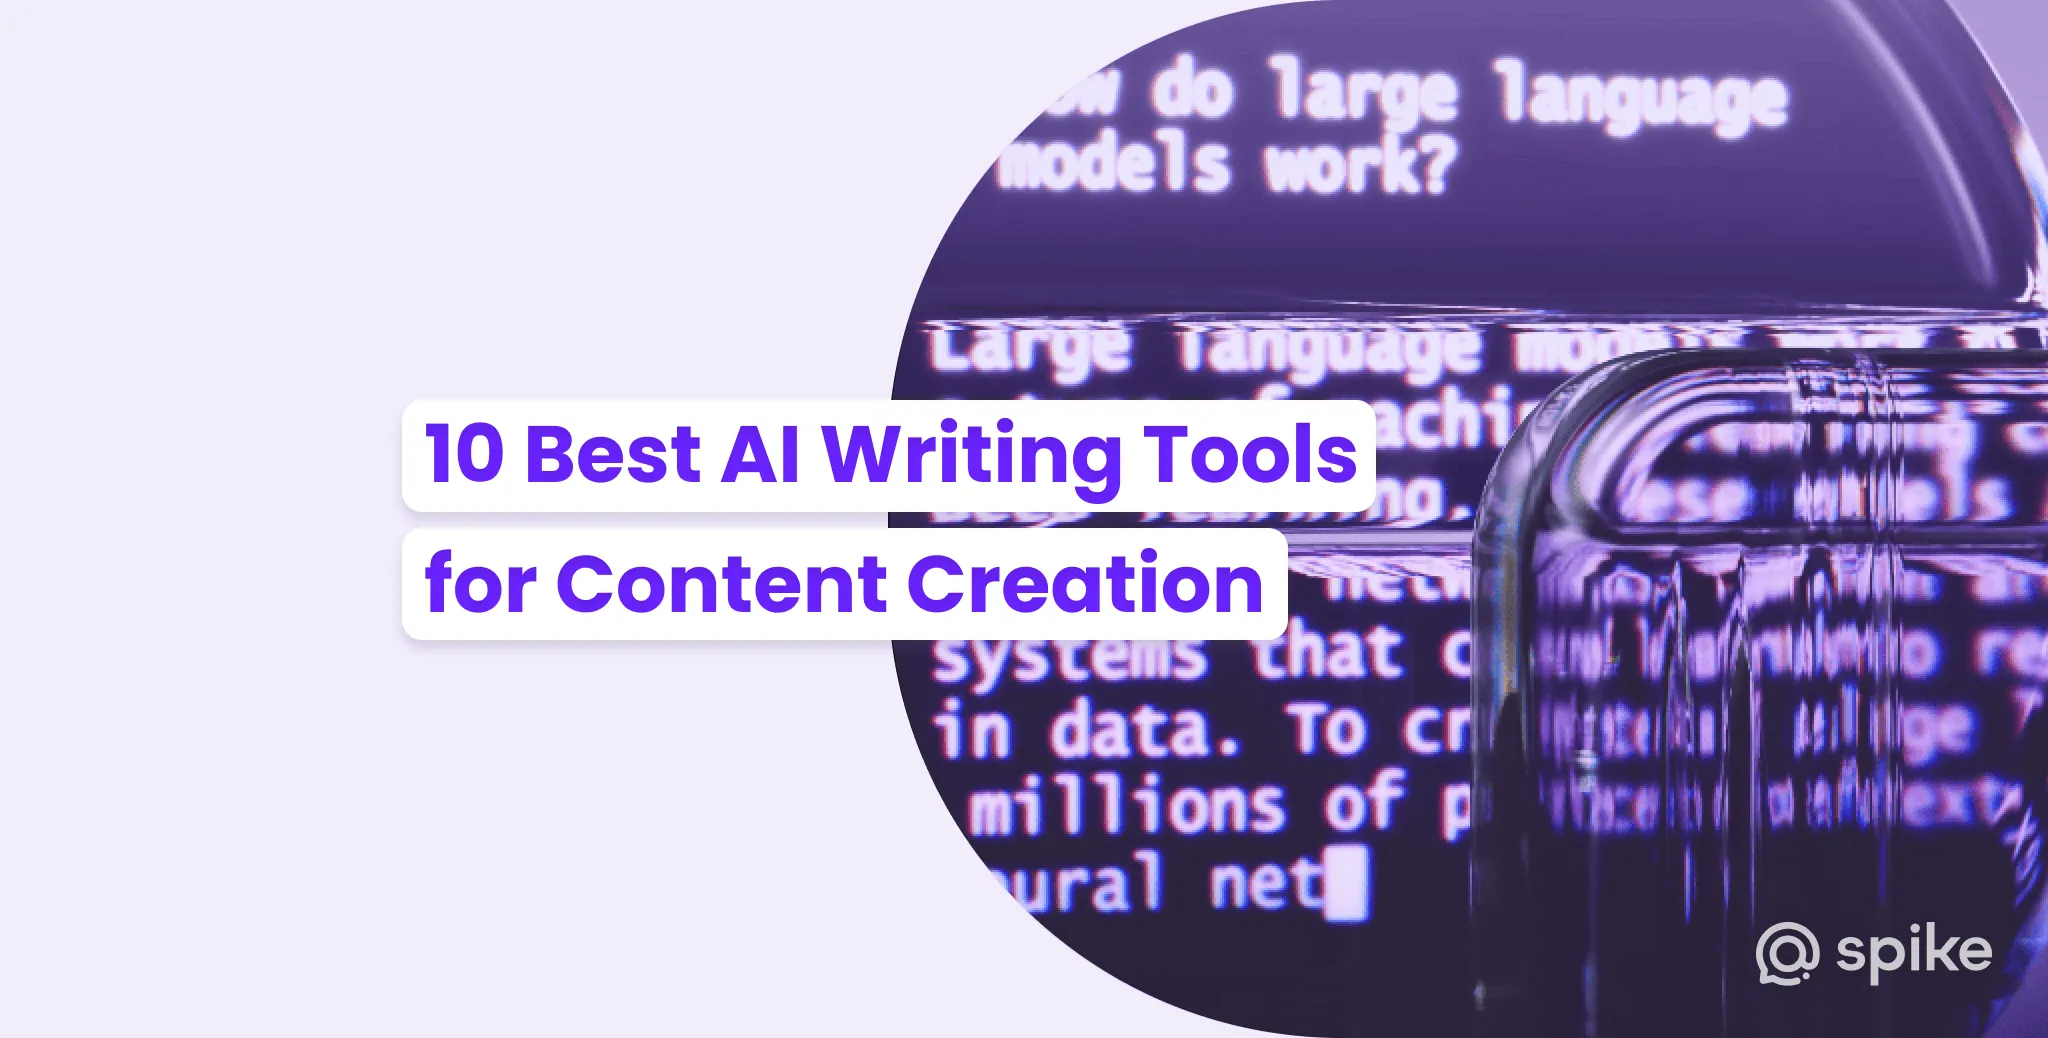 15 Best Content Writing Tools to Improve Your Writing in 2023